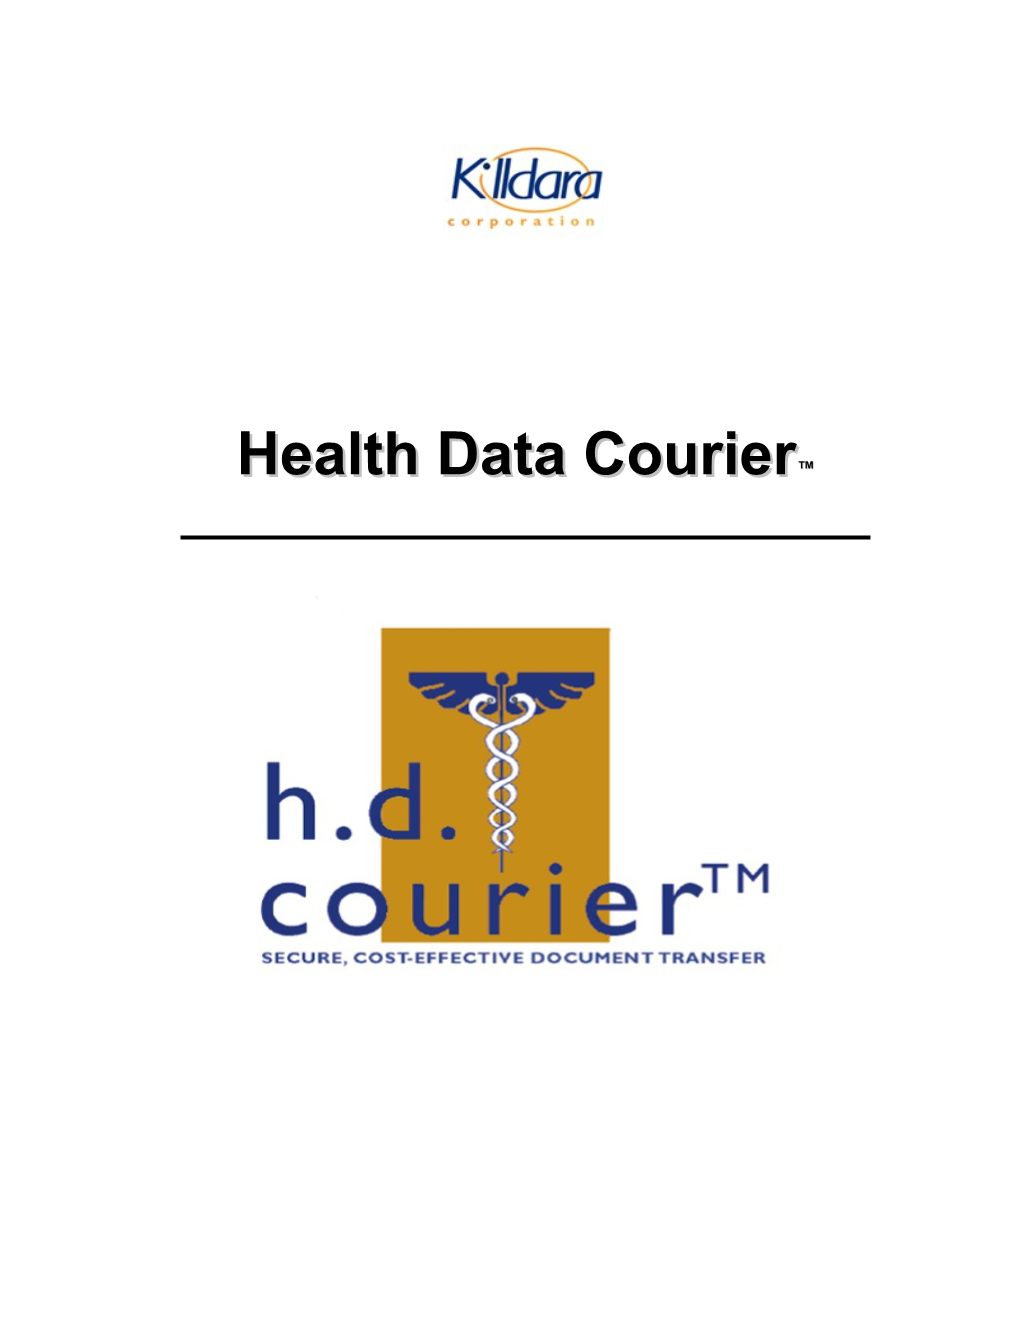 Health Data Courier Application Guide